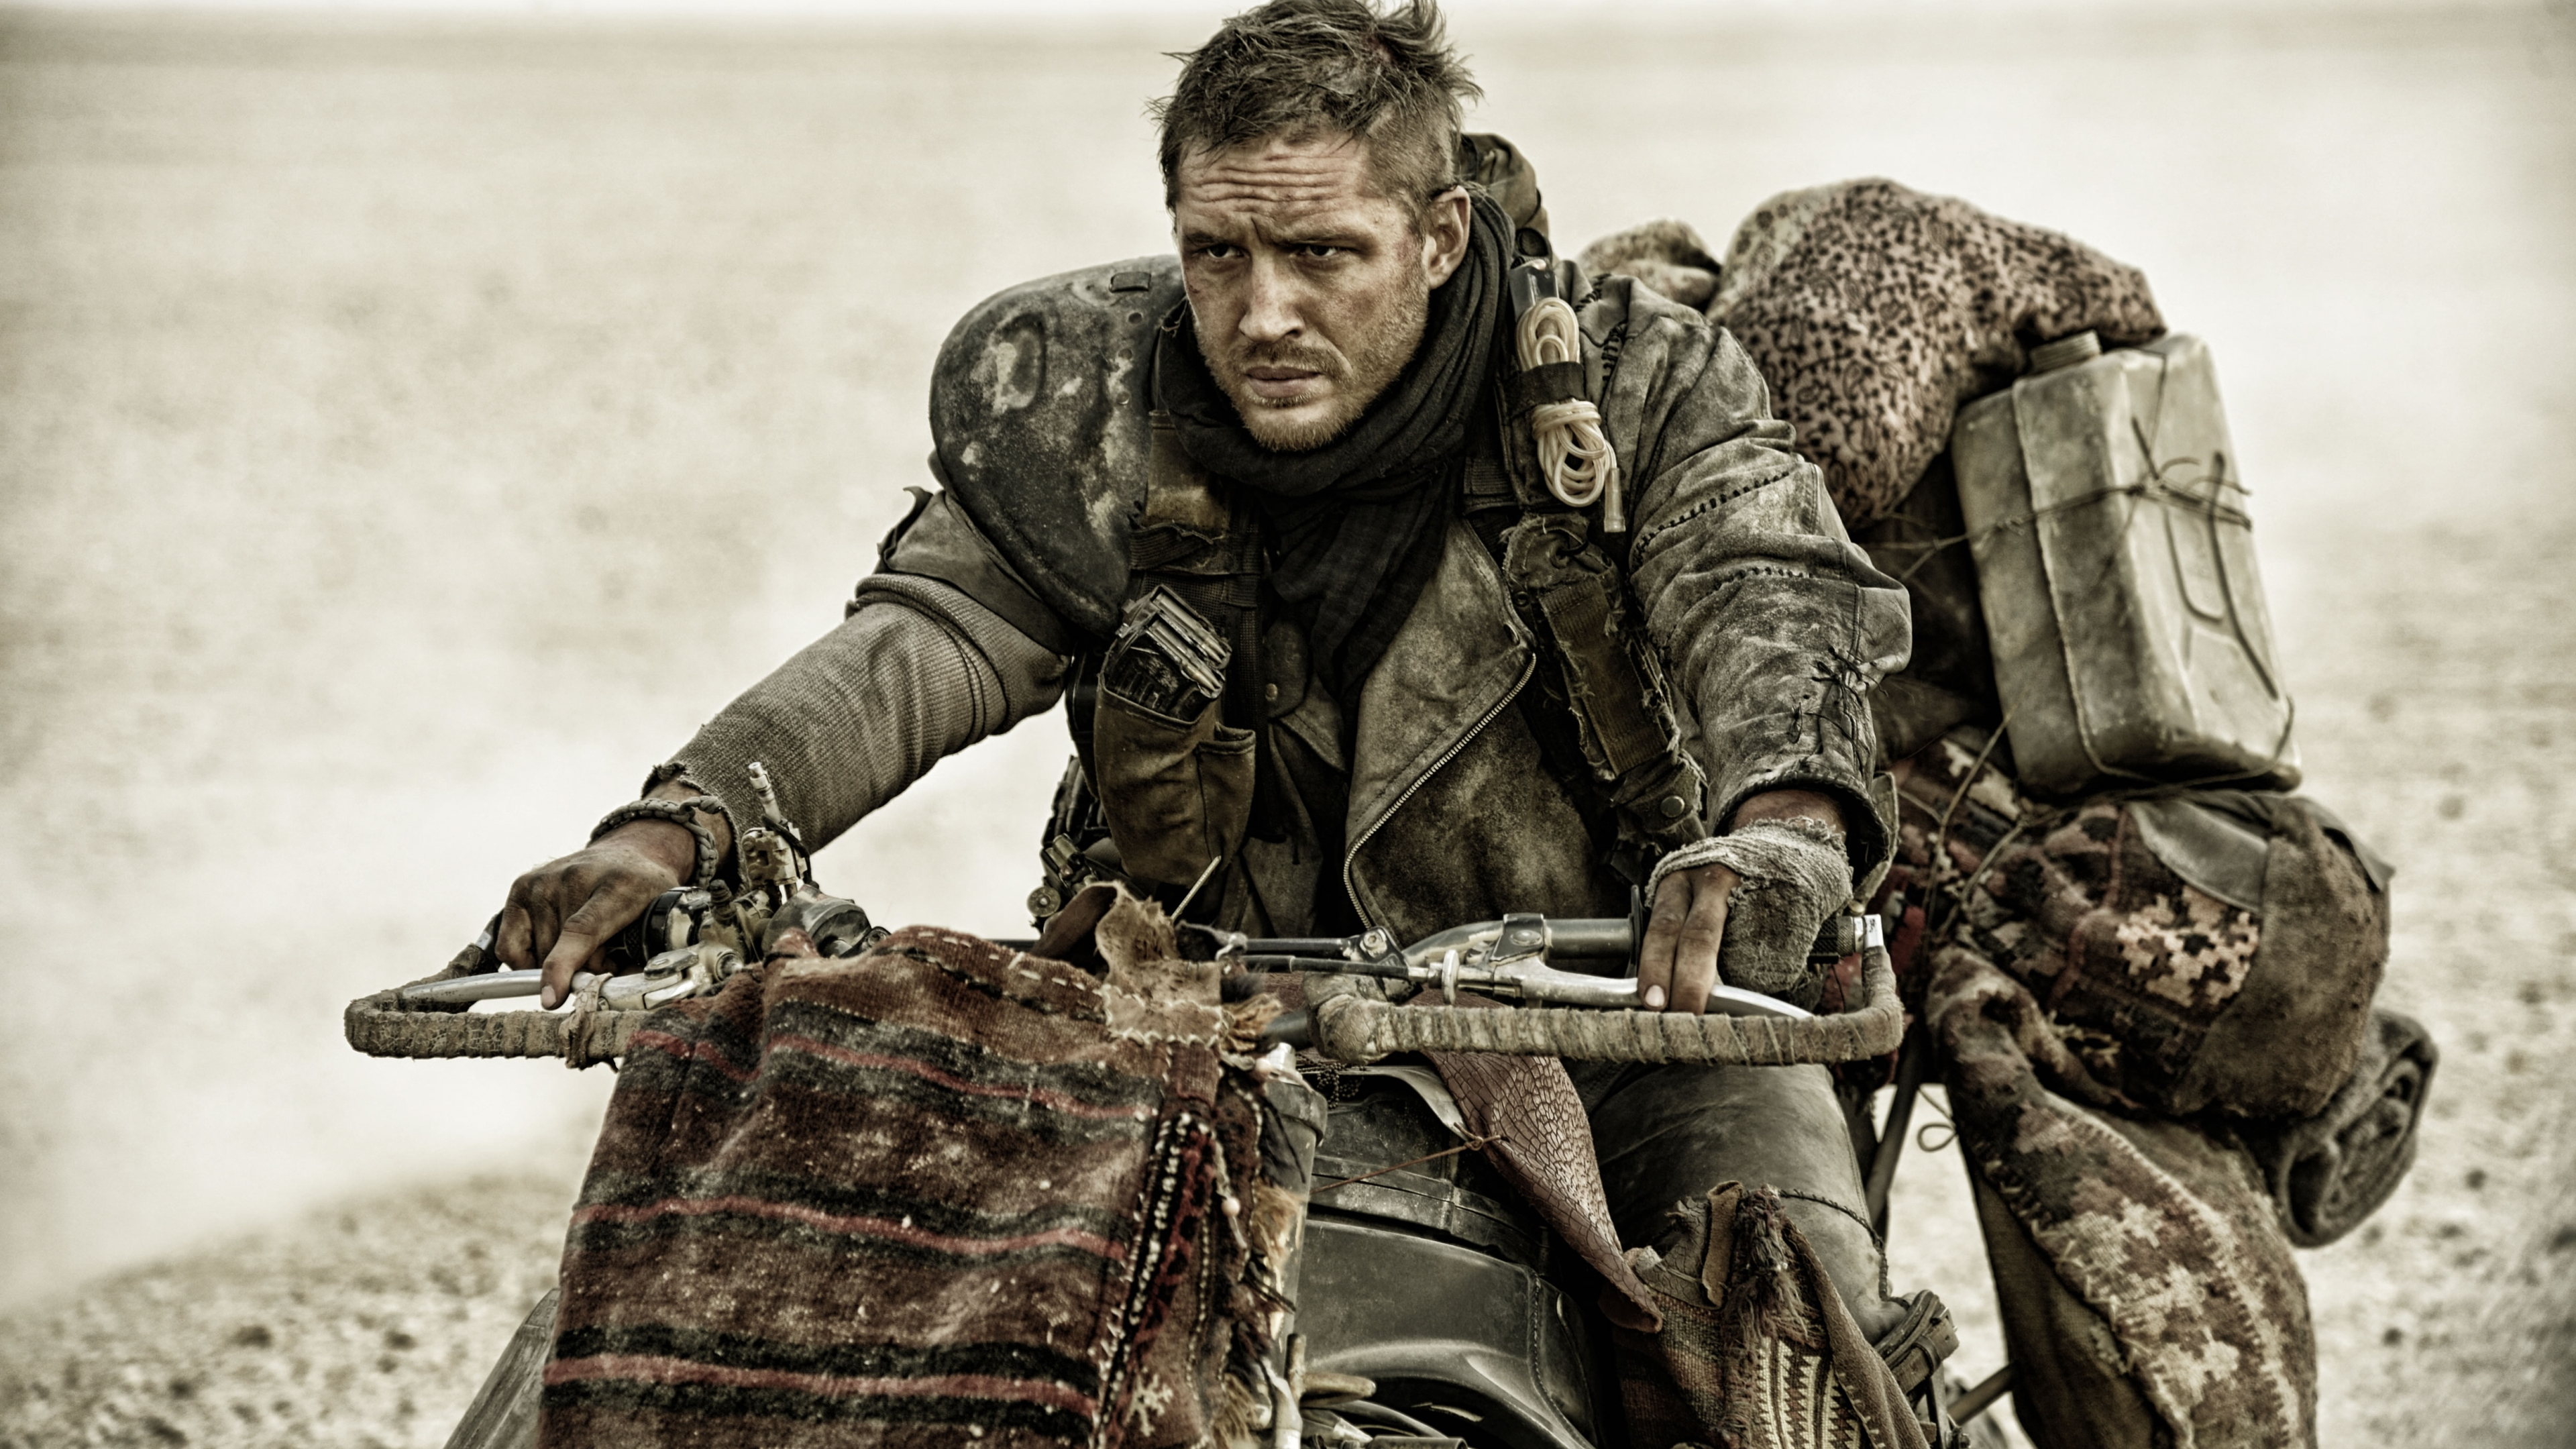 3840x2160 Mad Max Fury Road Tom Hardy Wallpaper 4k Wallpaper Hd Movies 4k Wallpapers Images Photos And Background Wallpapers Den